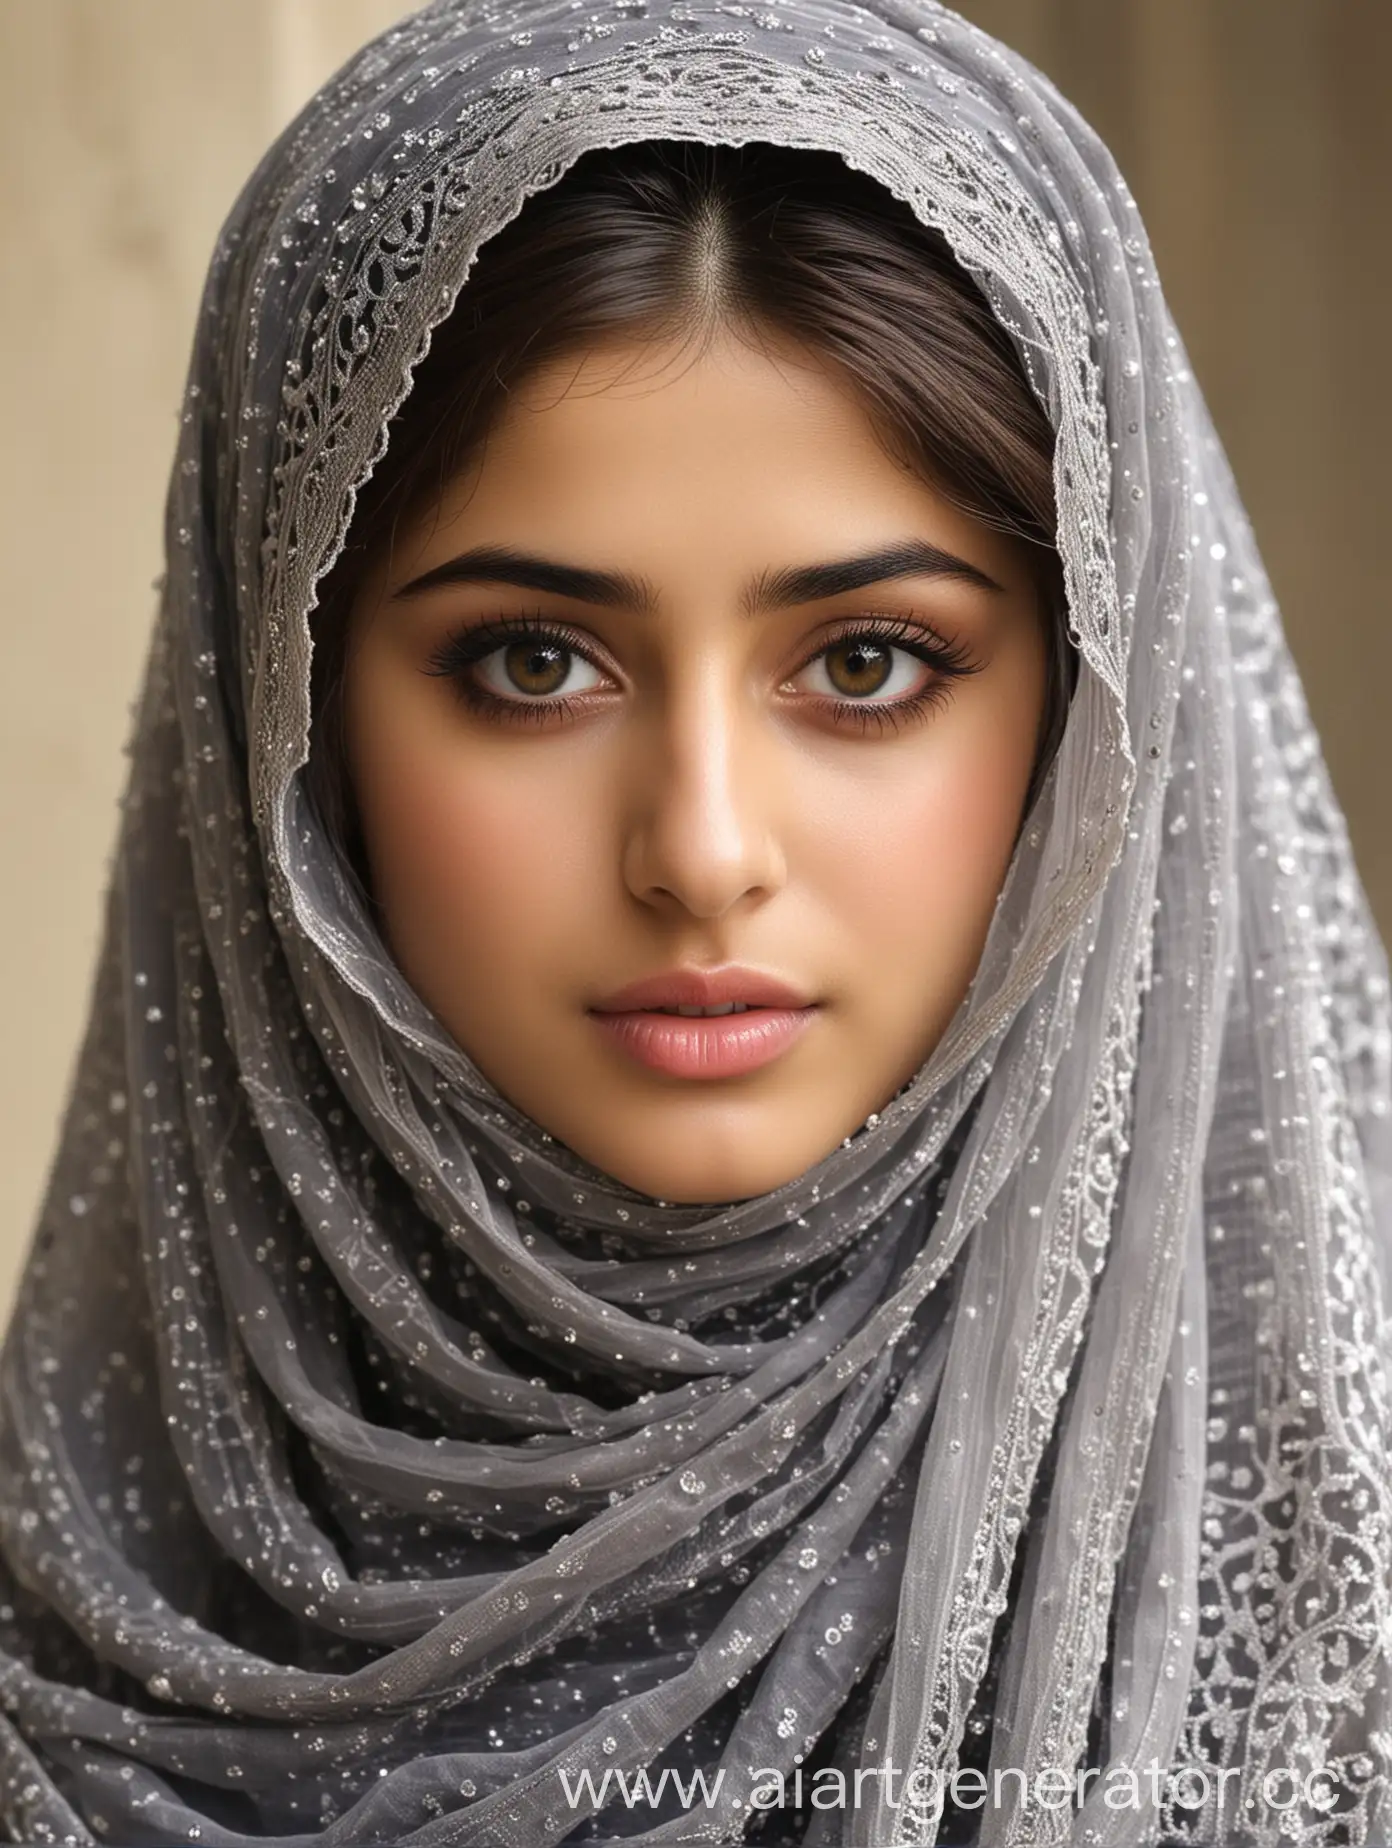 stunningly beautiful gorgeous young Pakistani muslim, actress Sajal Ali, younger than eighteen year old, fair white skin, face covered by niqab, expressive clear eyes, photorealistic, hyper realistic, clear, highly defined, shalwar qameez, fresh face without makeup, full body view, body covered in abaya, black eyes iris,